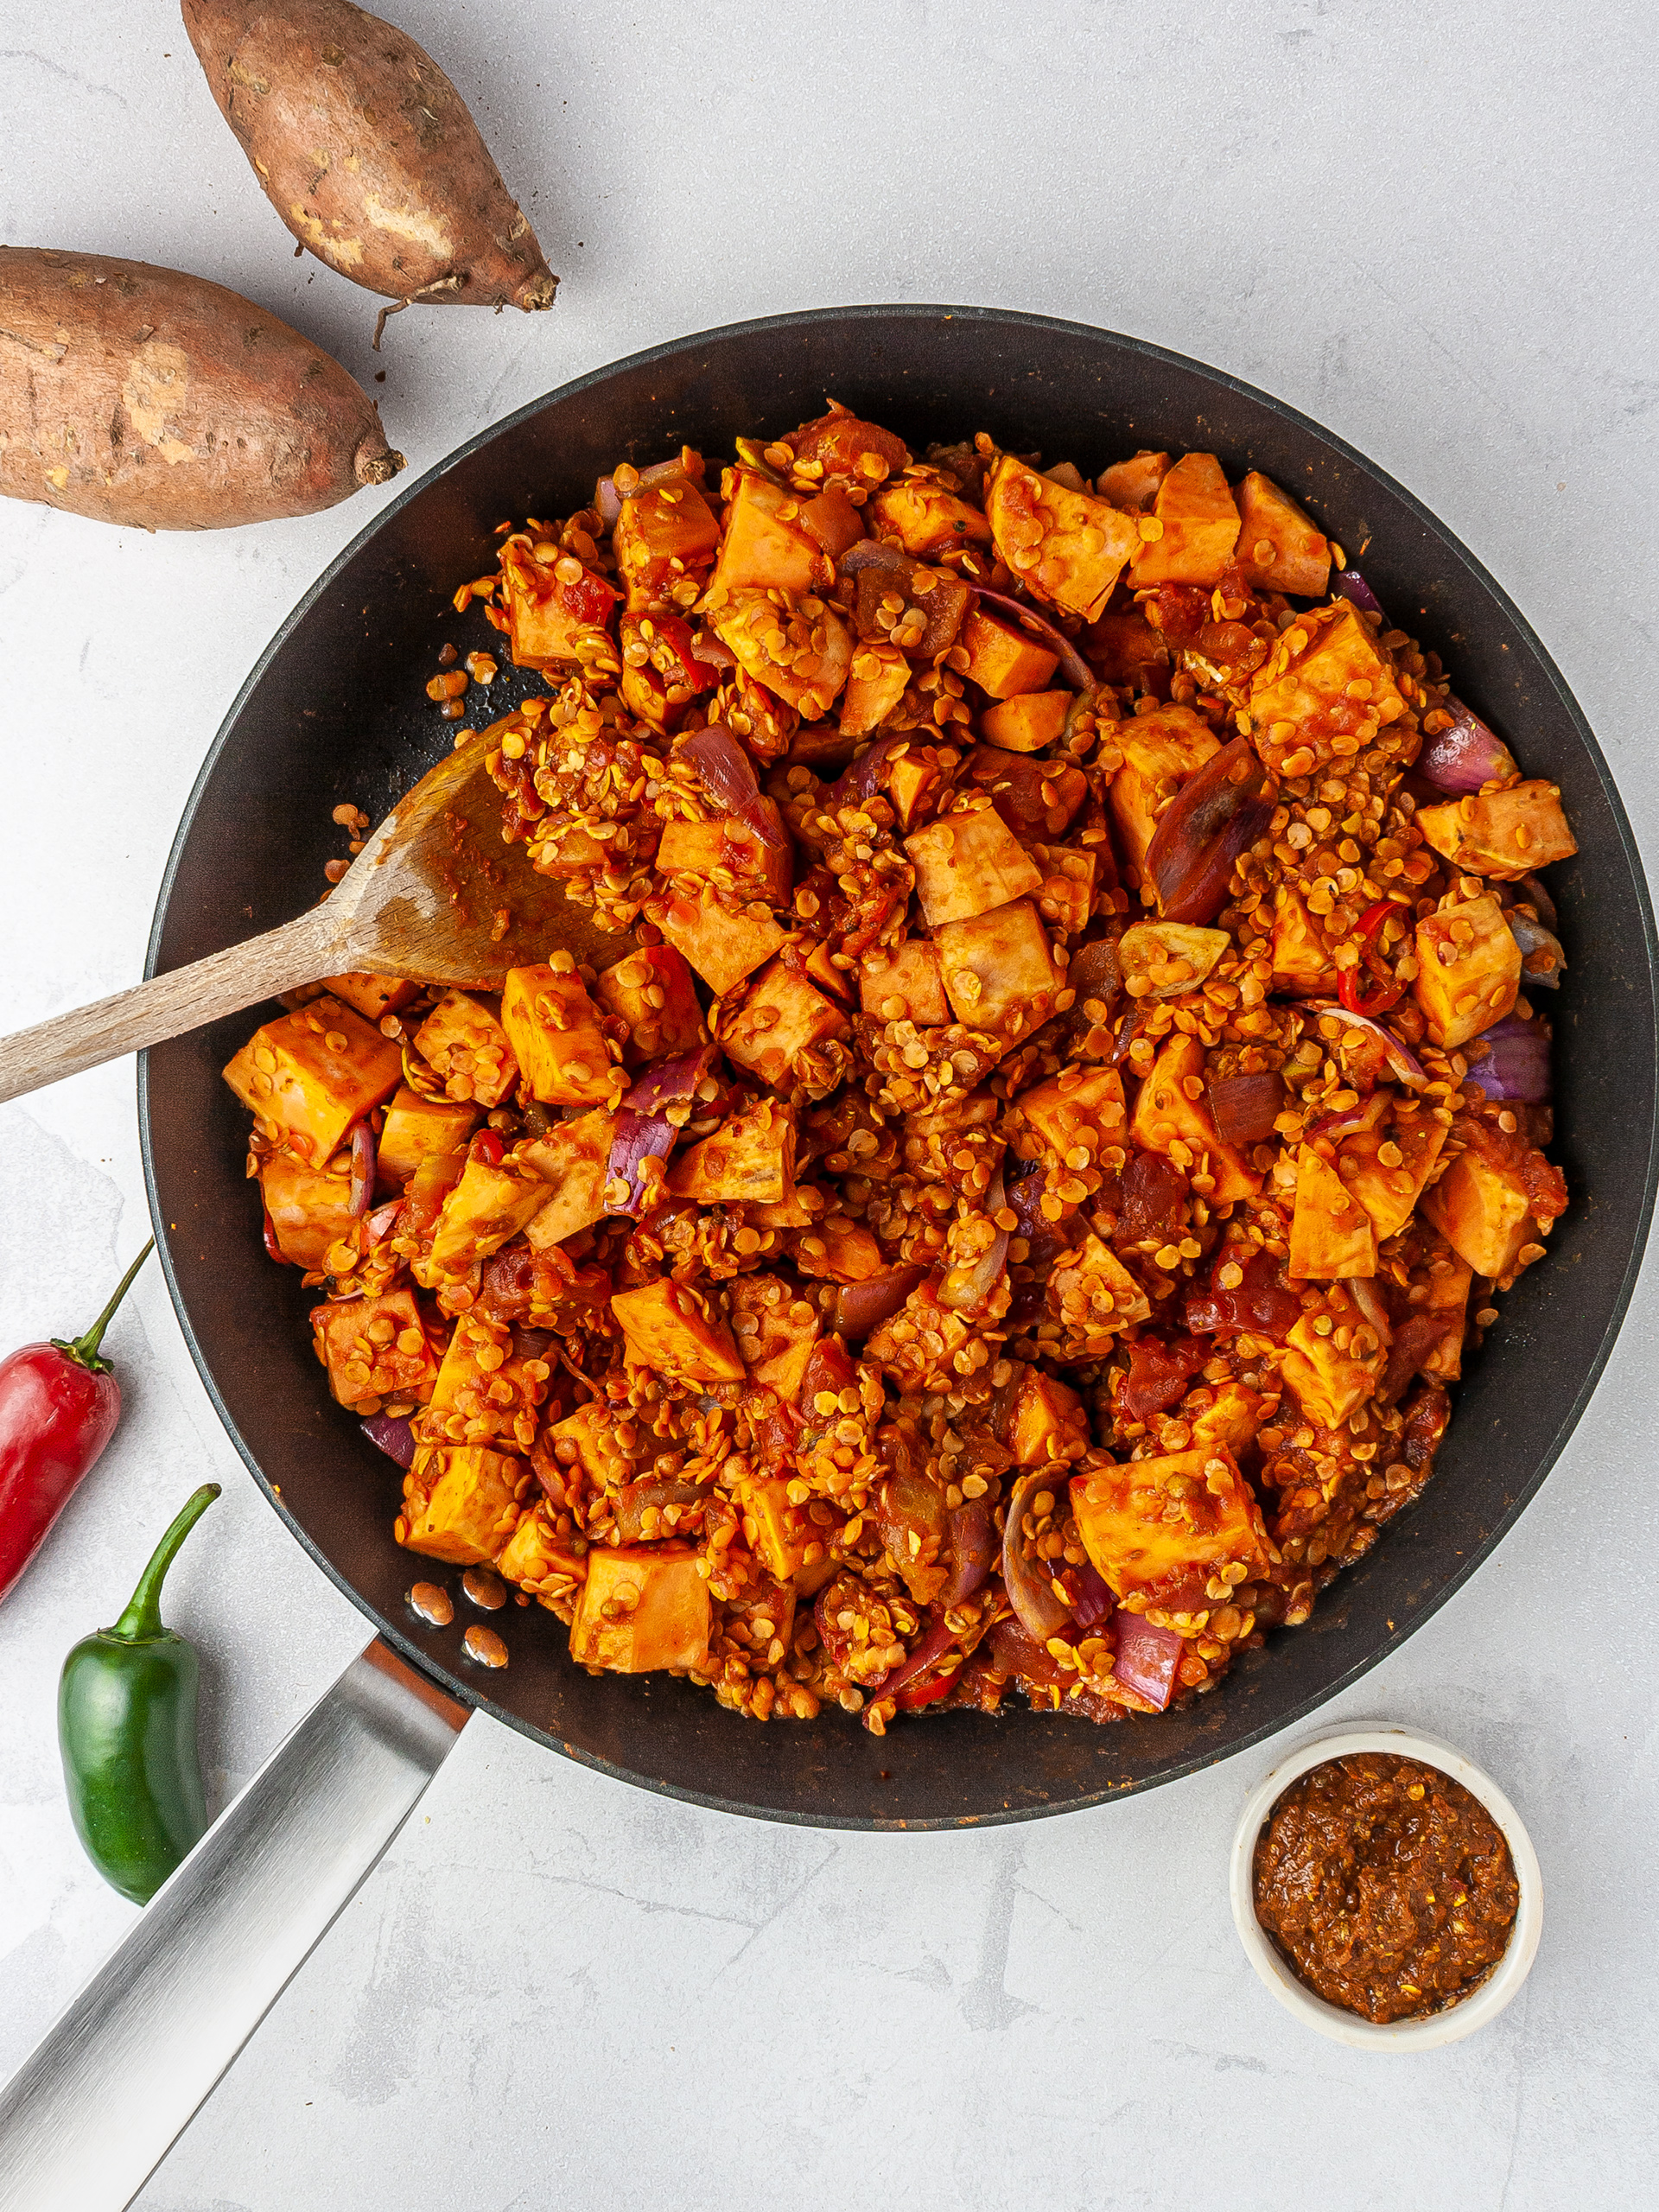 Sweet potatoes, red lentils, and tomato sauce in the curry.